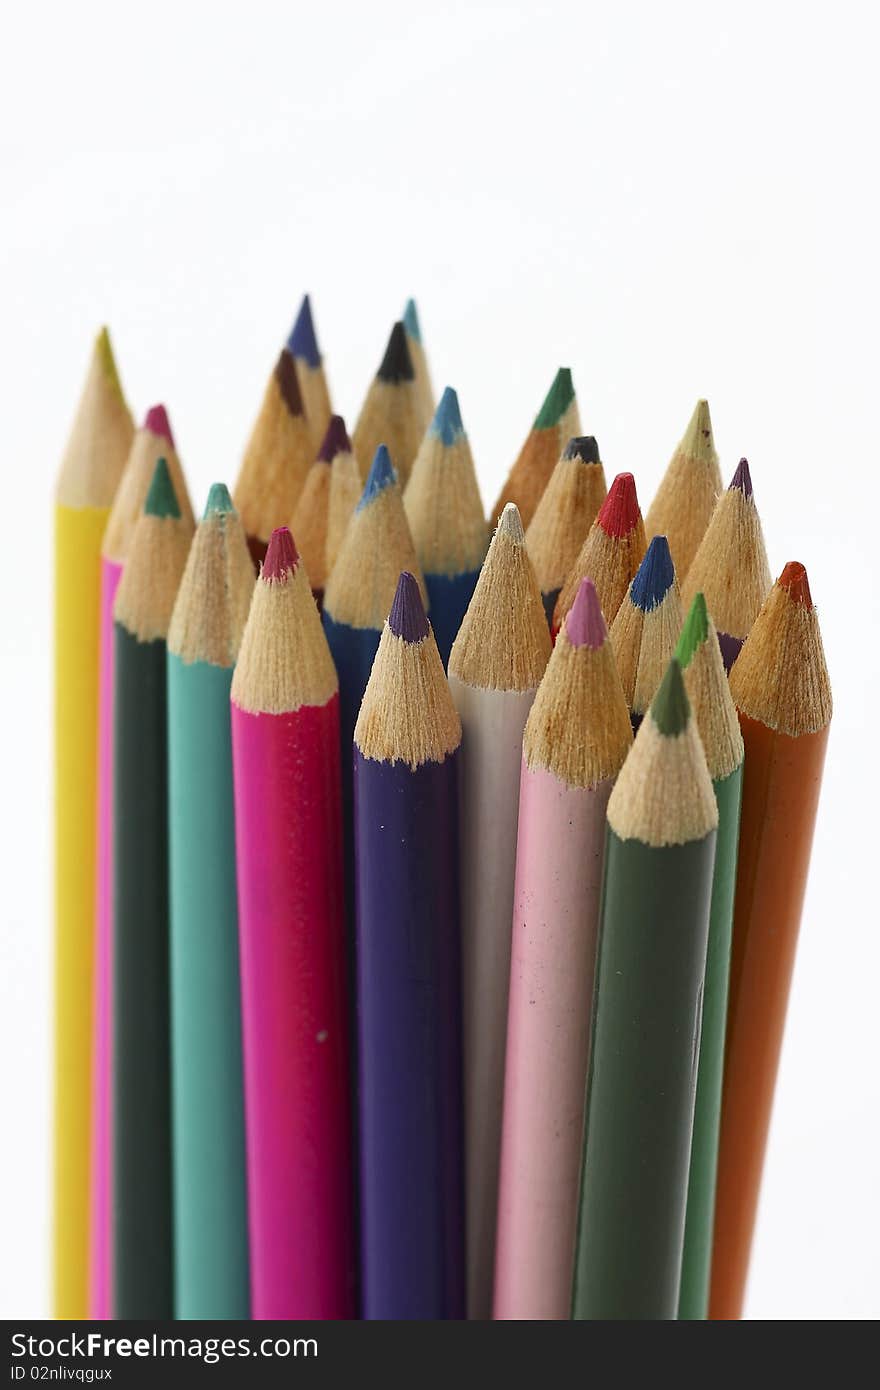 Color pencil has brought us a beautiful picture